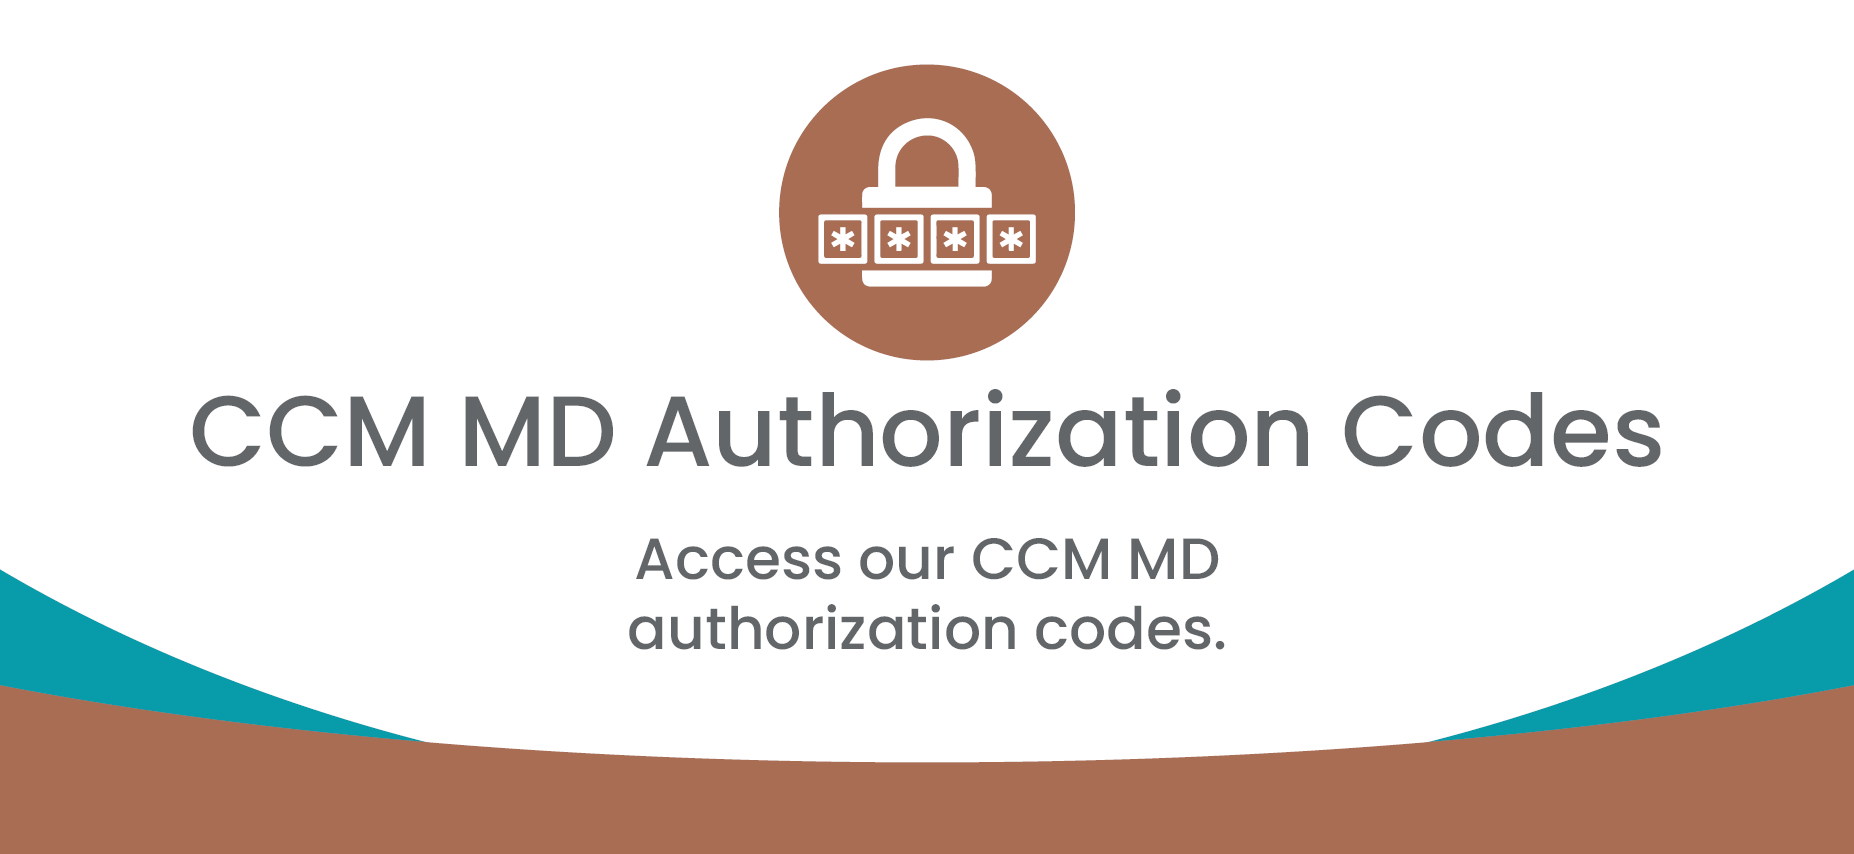 CCM MD Auth Codes